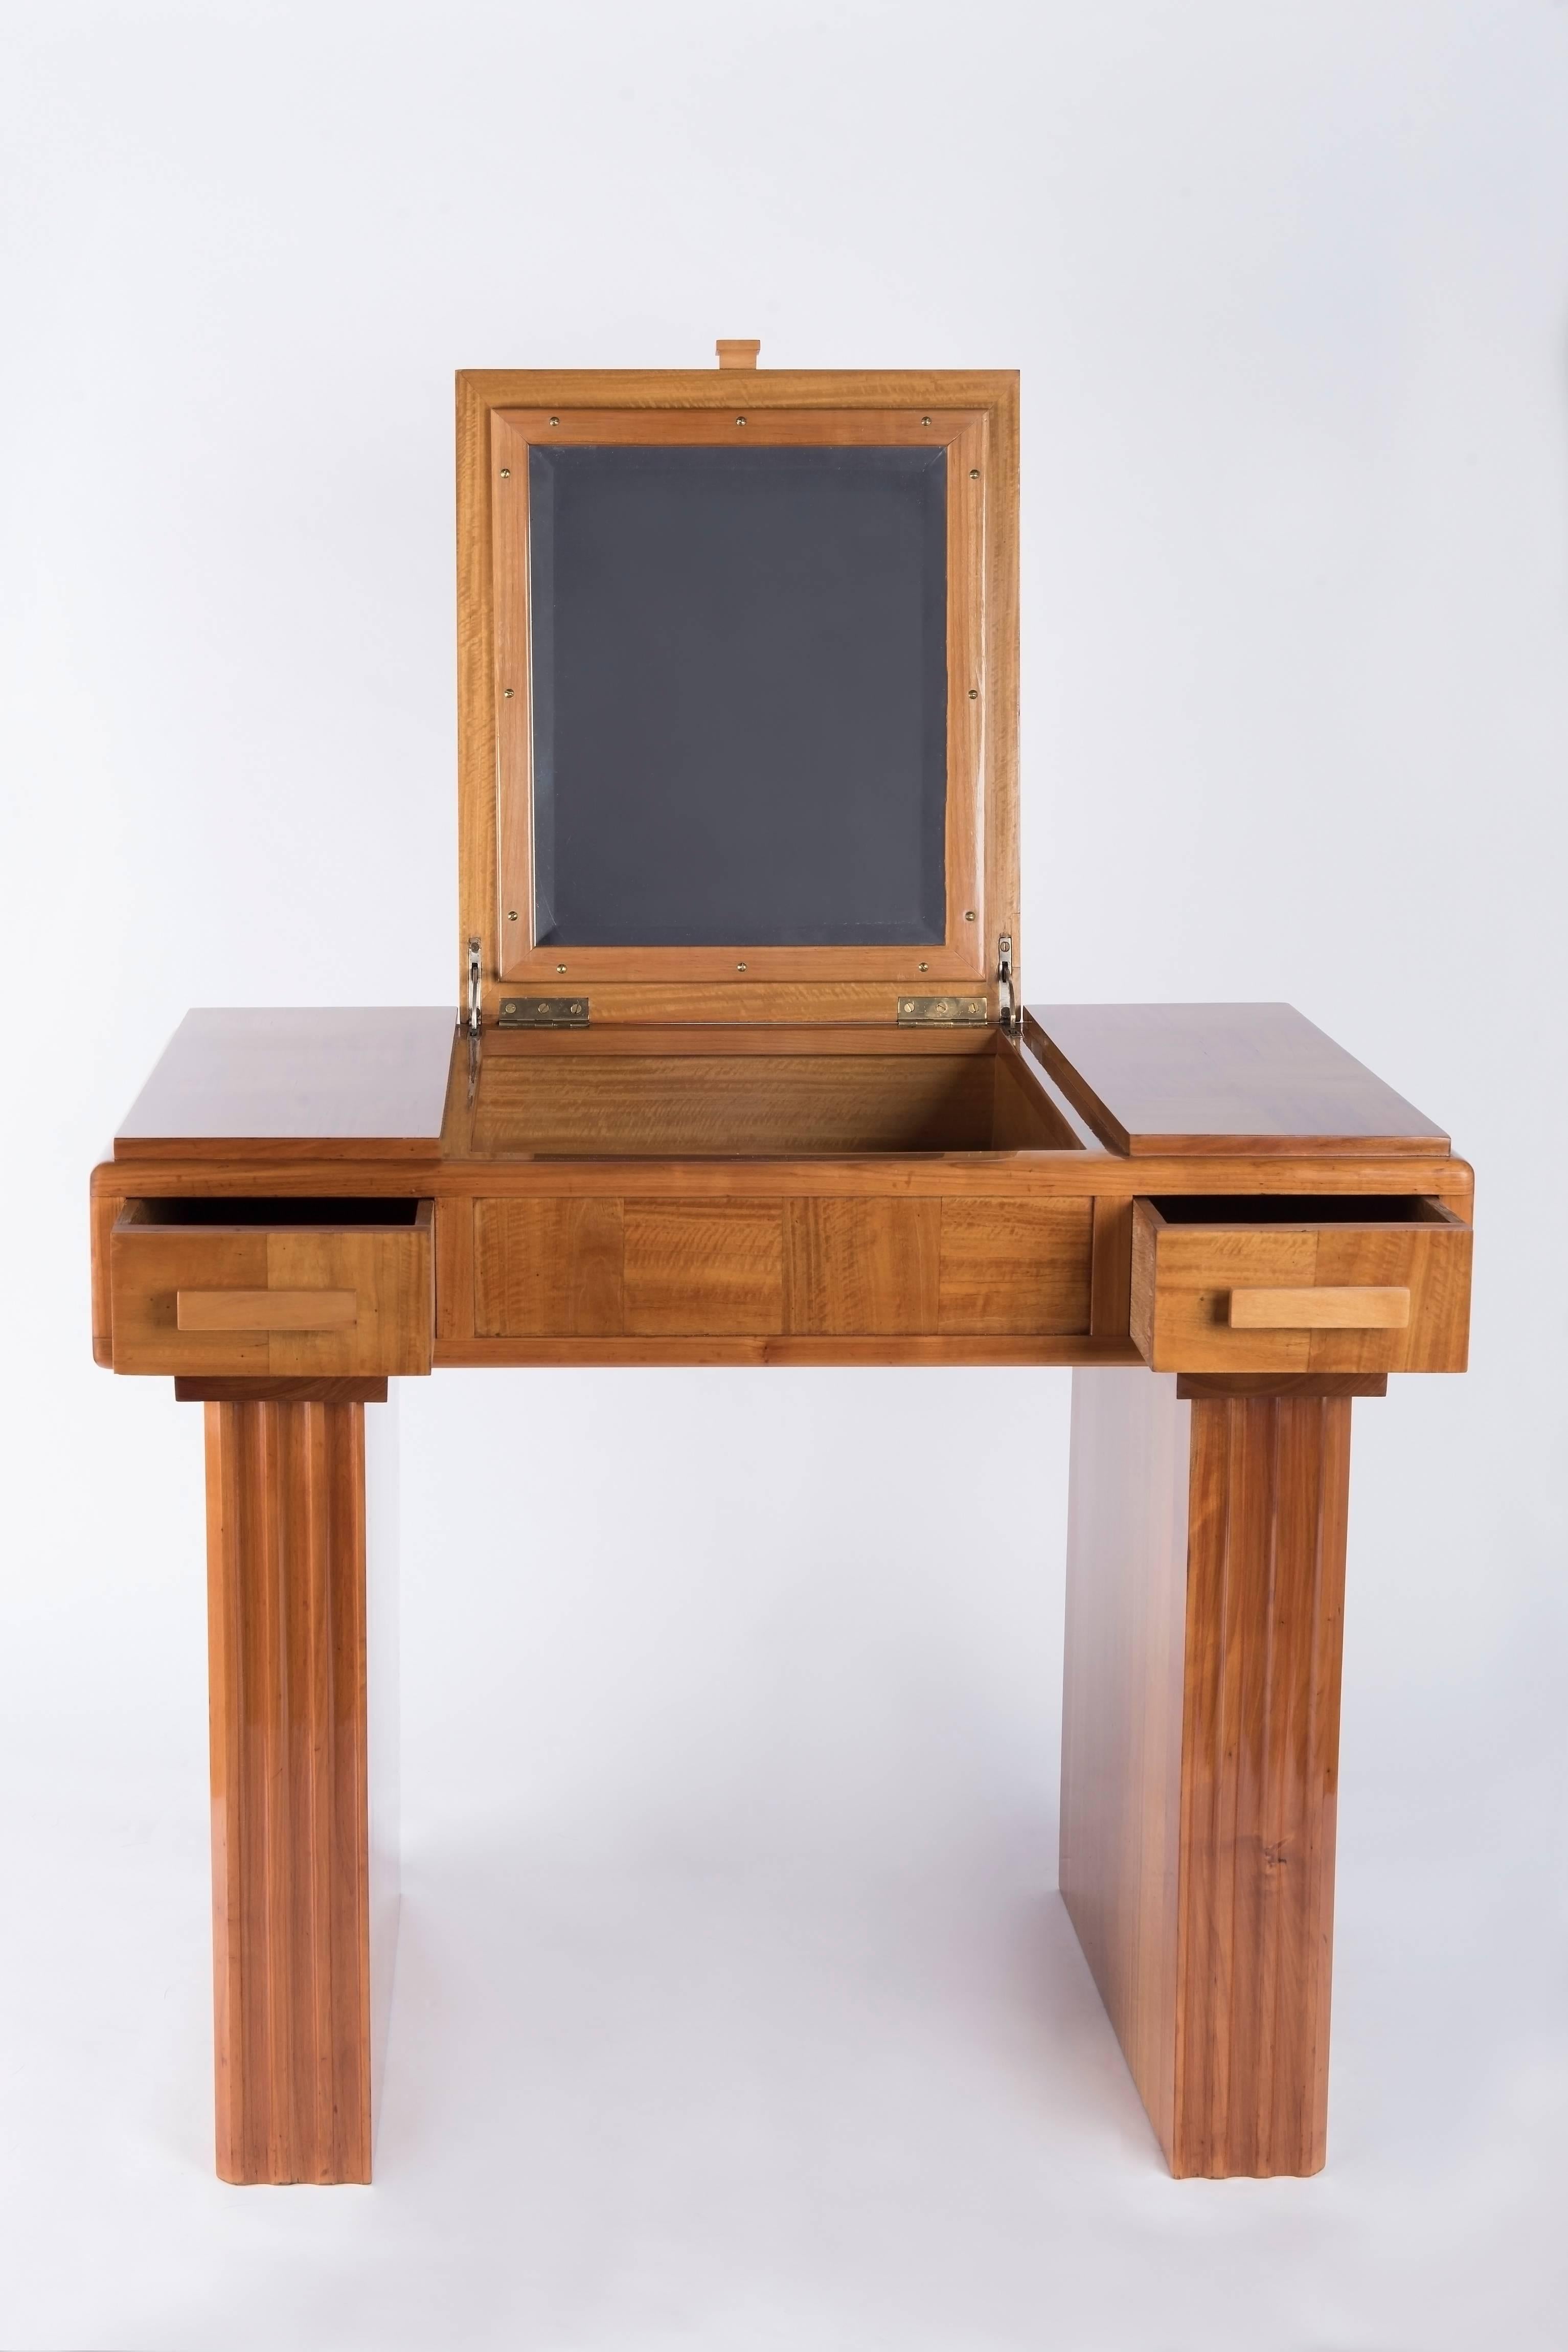 1930s lemonwood veneered French origin art-deco vanity. It can be used as well as a small desk .
Top opening to a small cabinet, mirror inside of the top. Two drawers,one on each side. Wooden handles. Small shelves on both sides. Veneered and